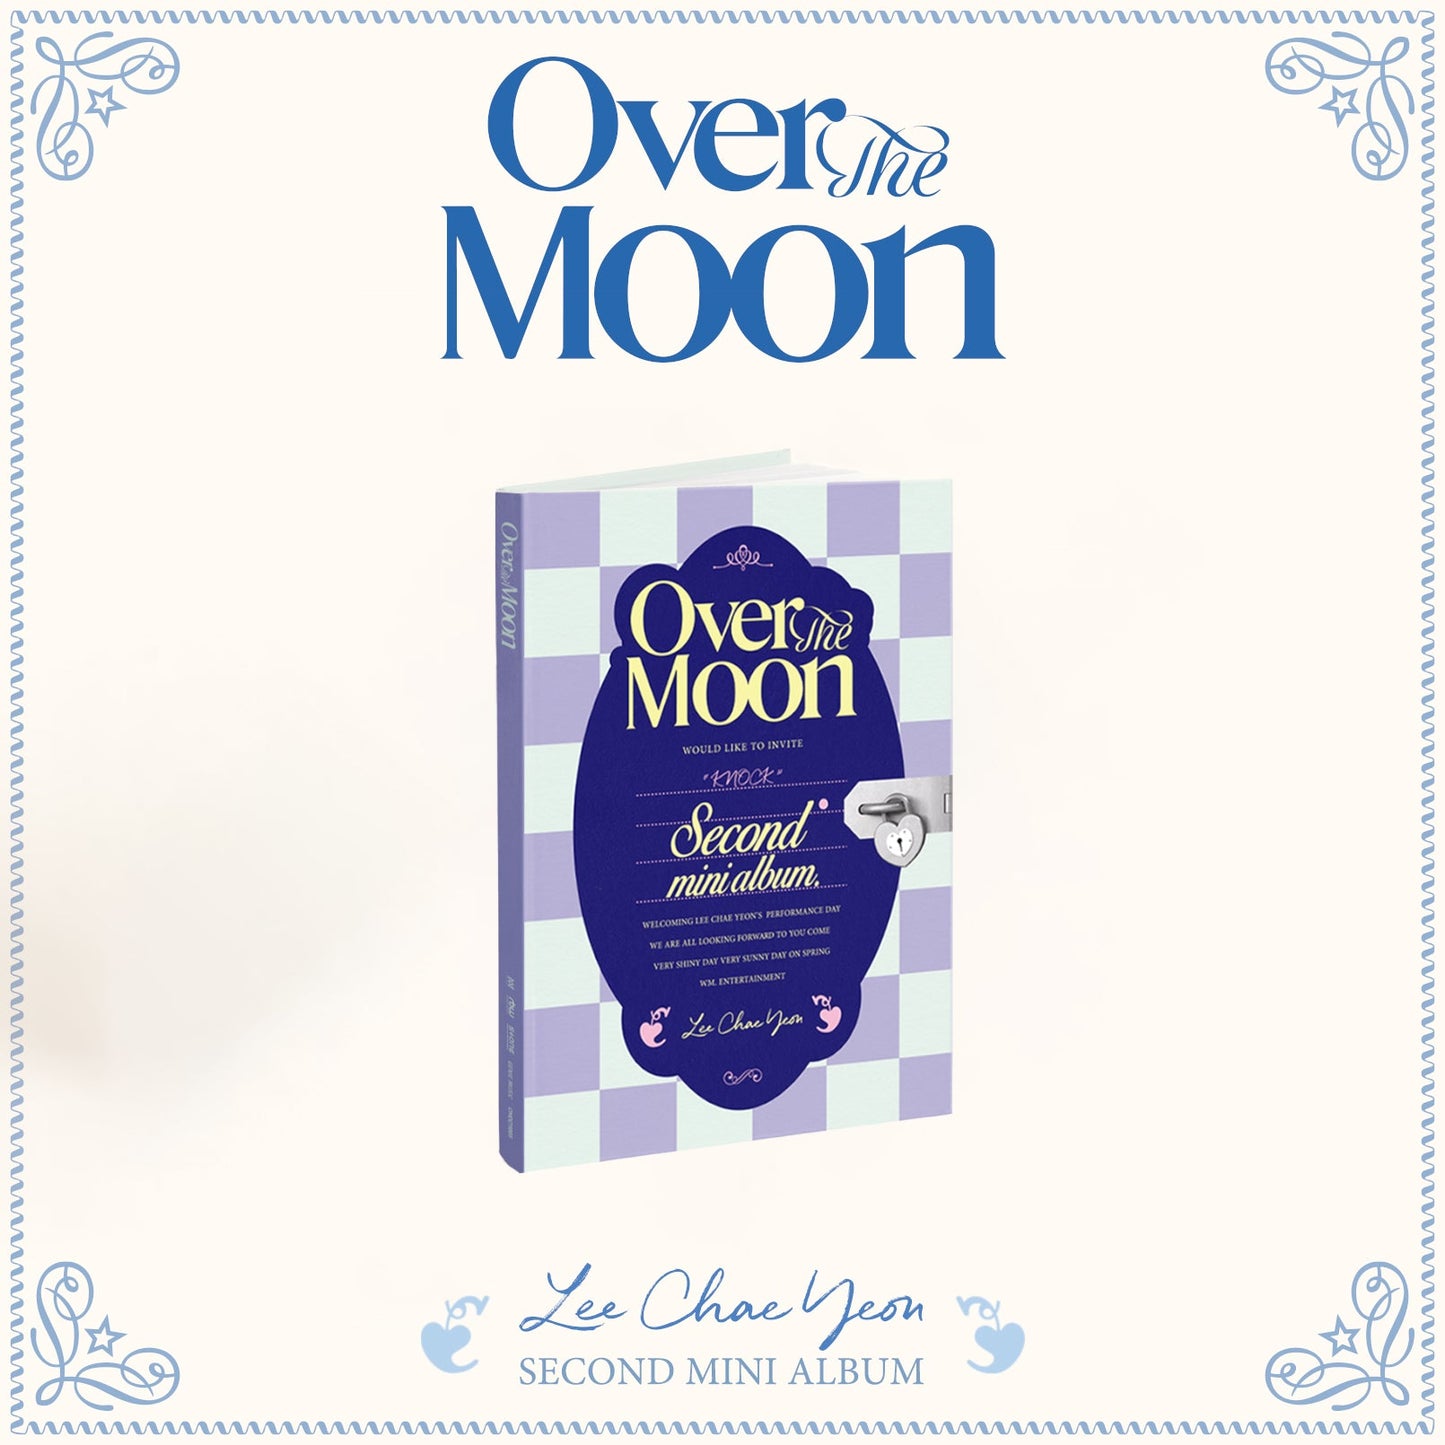 LEE CHAEYEON 2ND MINI ALBUM 'OVER THE MOON' NIGHT VERSION COVER